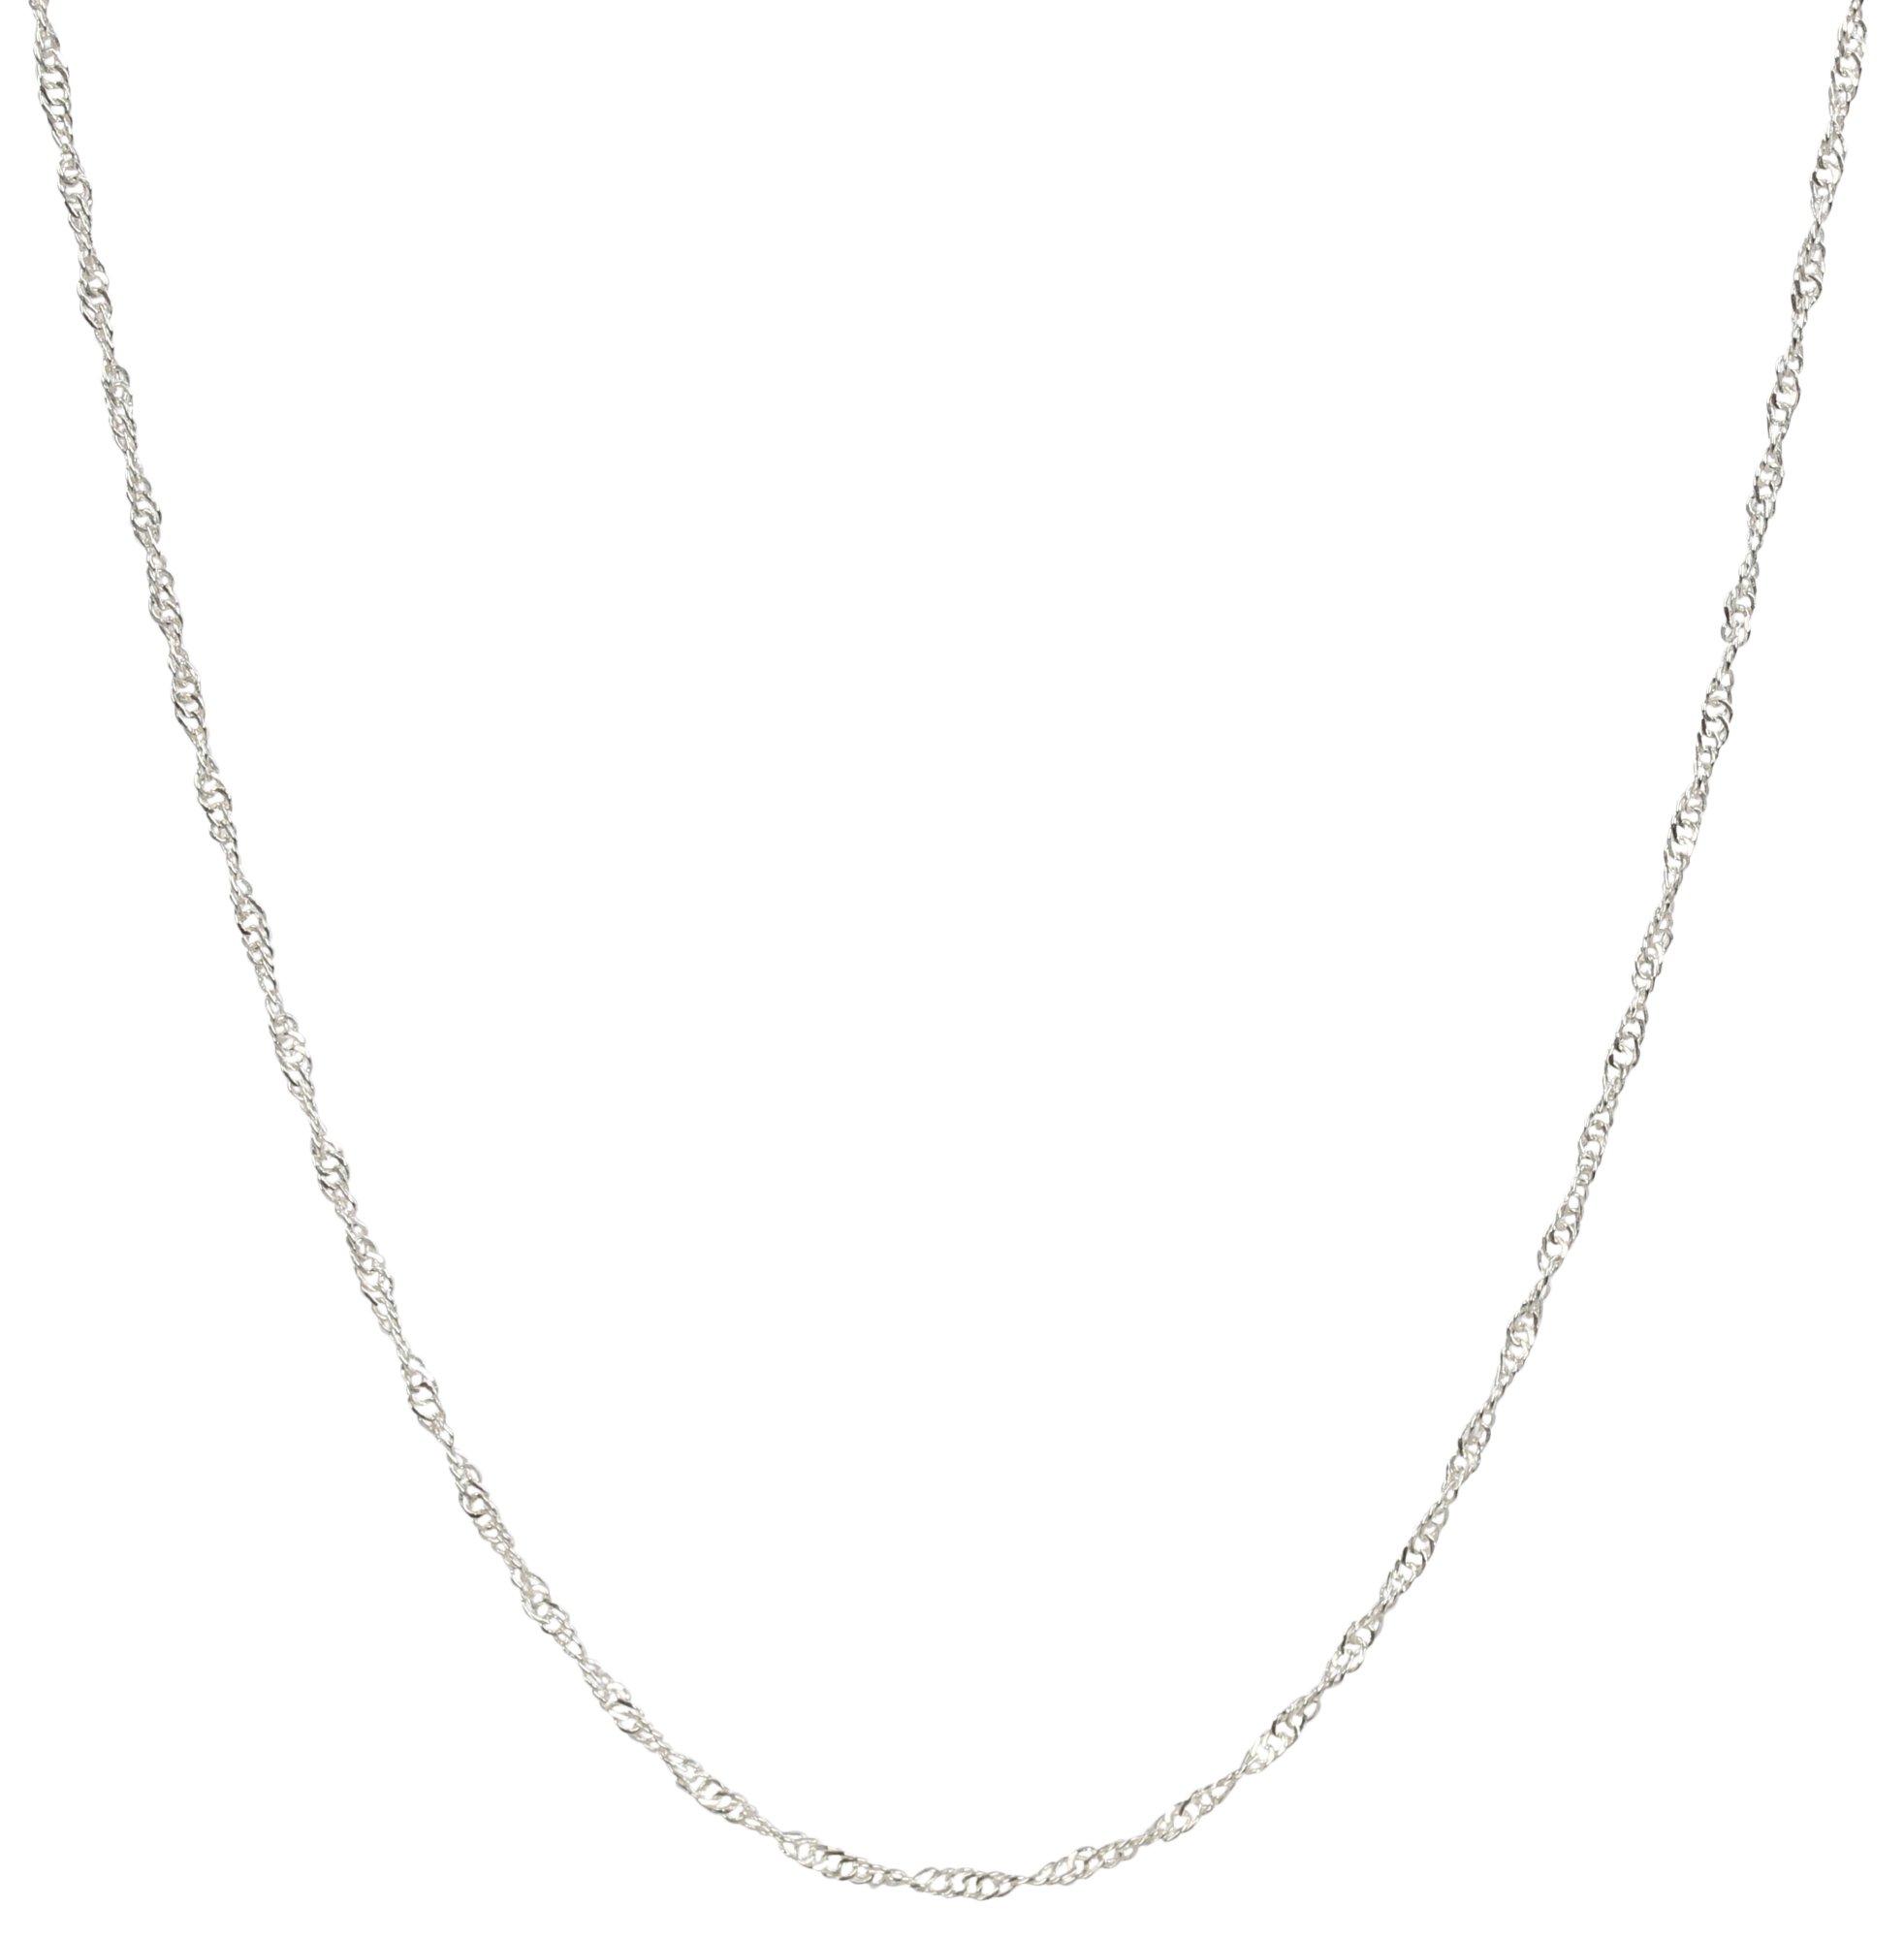 Piper & Taylor 18 In. Singapore Chain Necklace